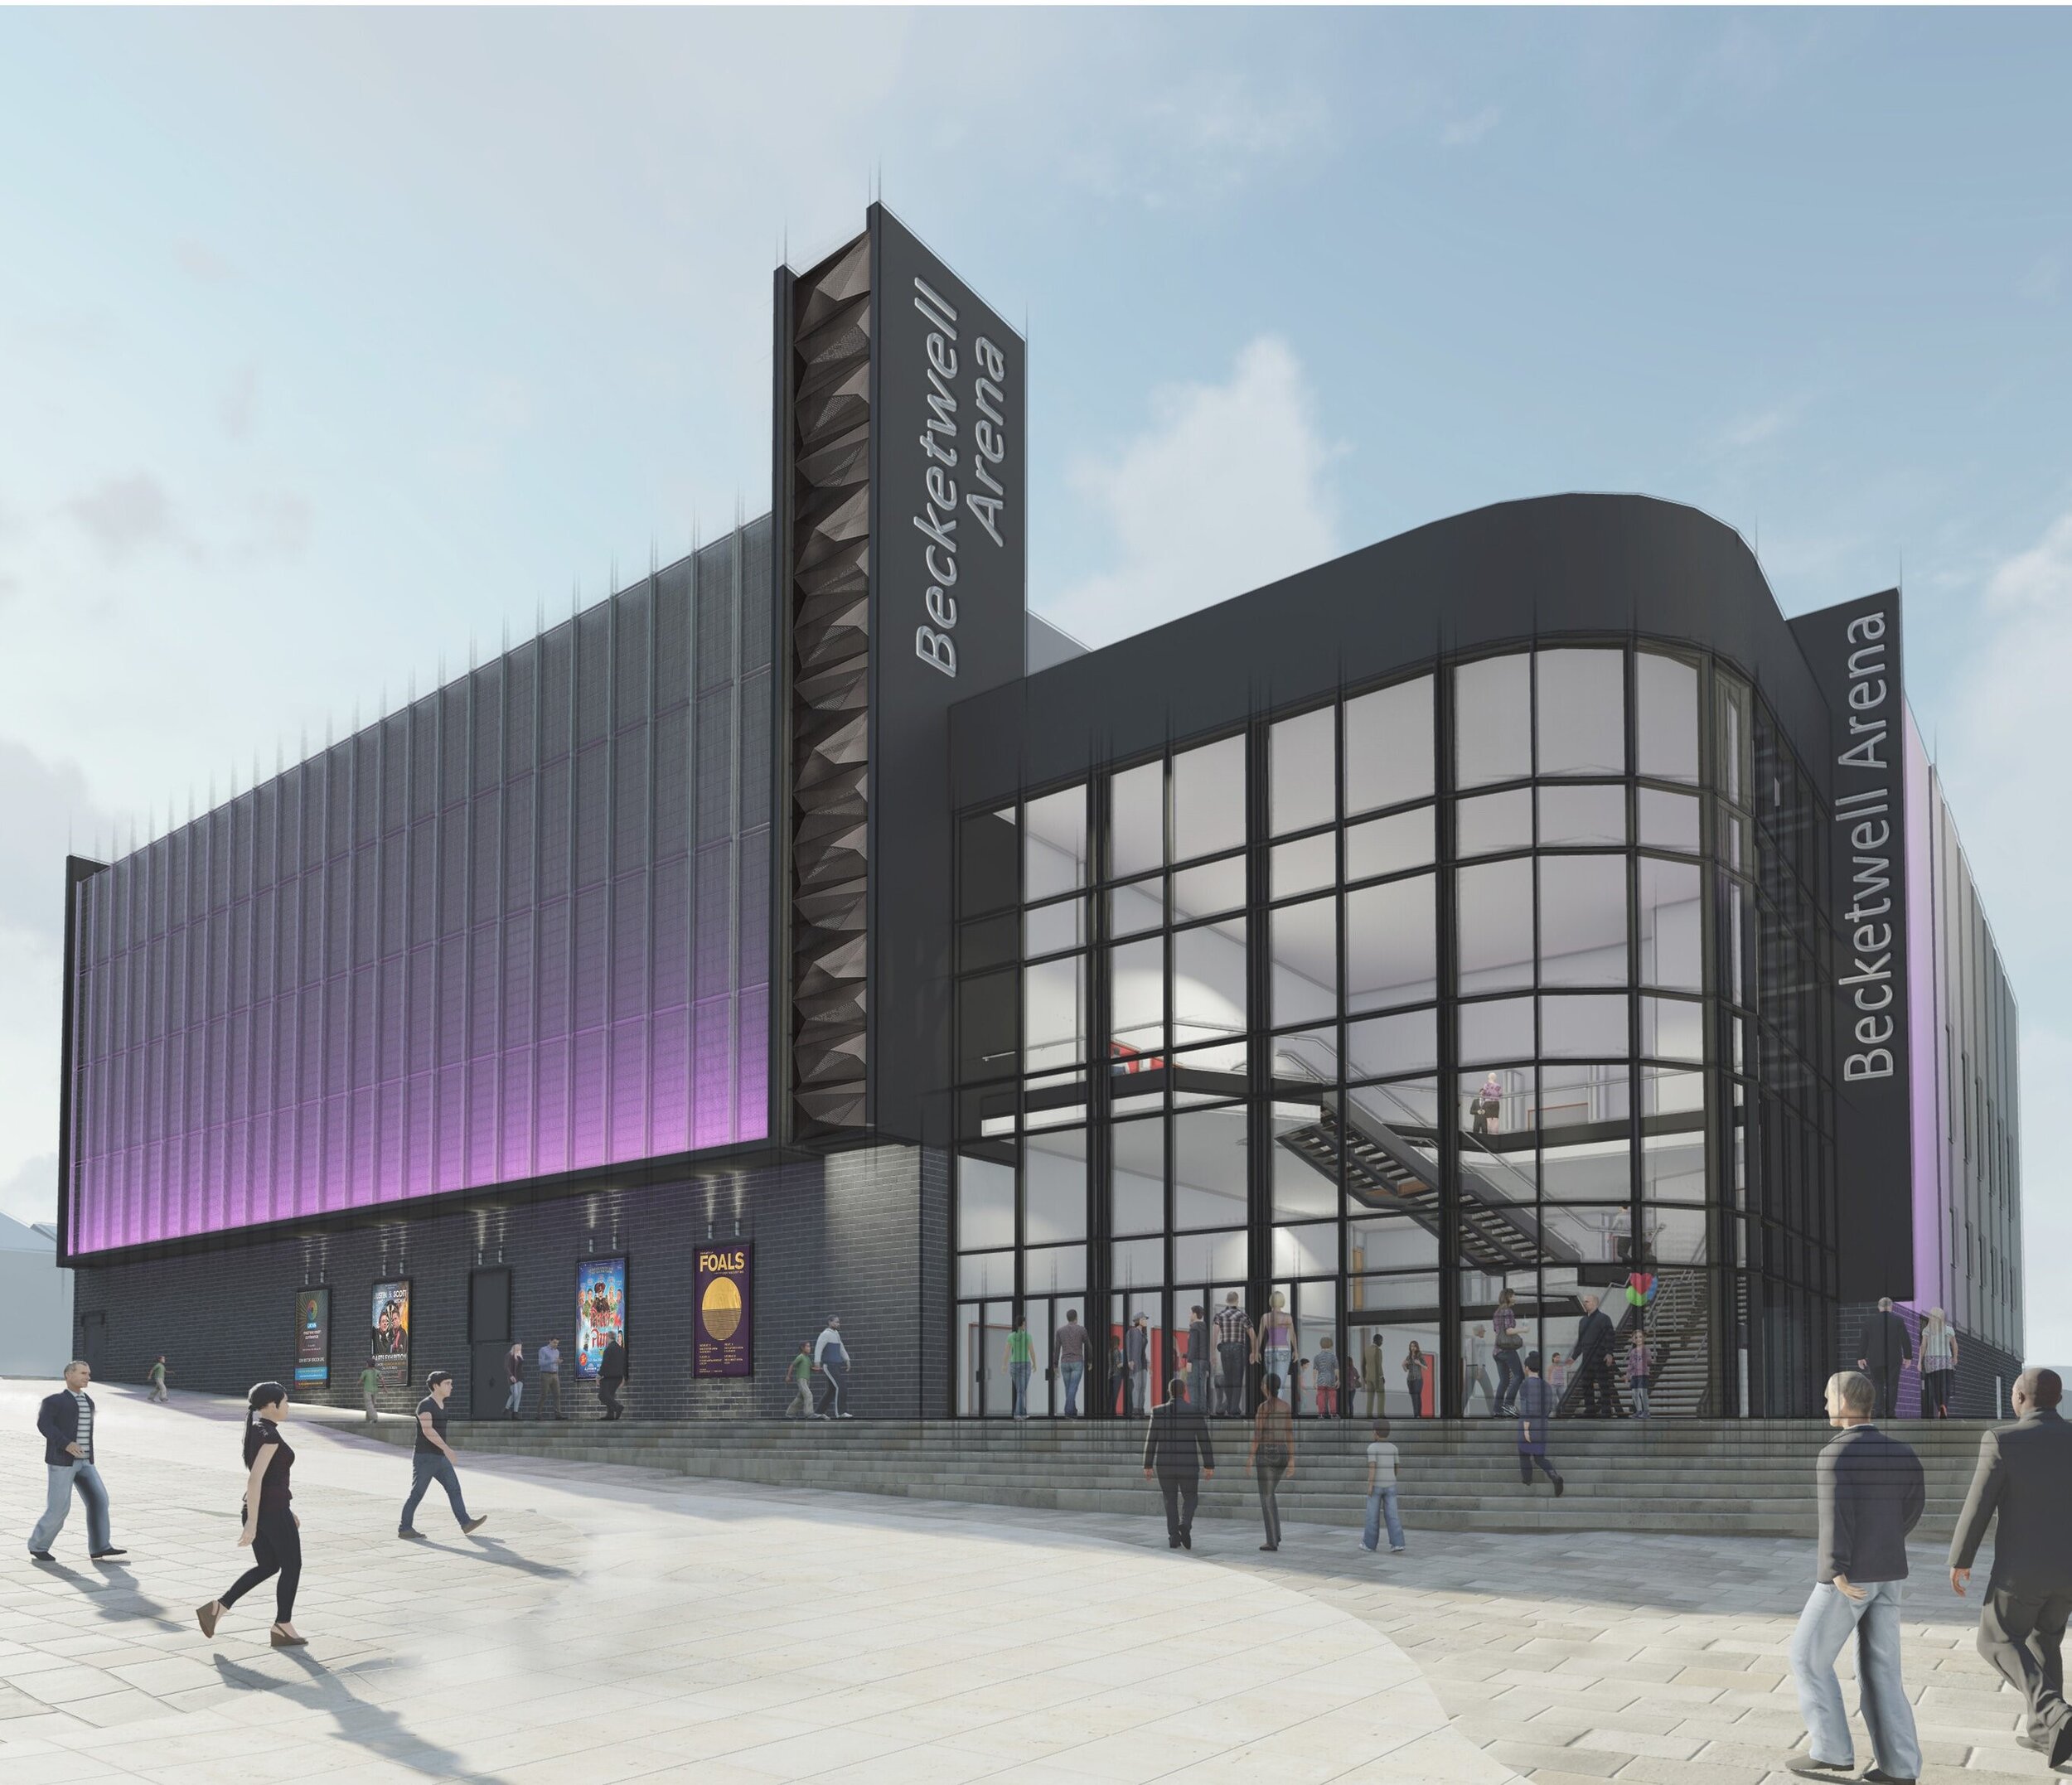 Consultation reveals ‘overwhelming support’ for performance venue